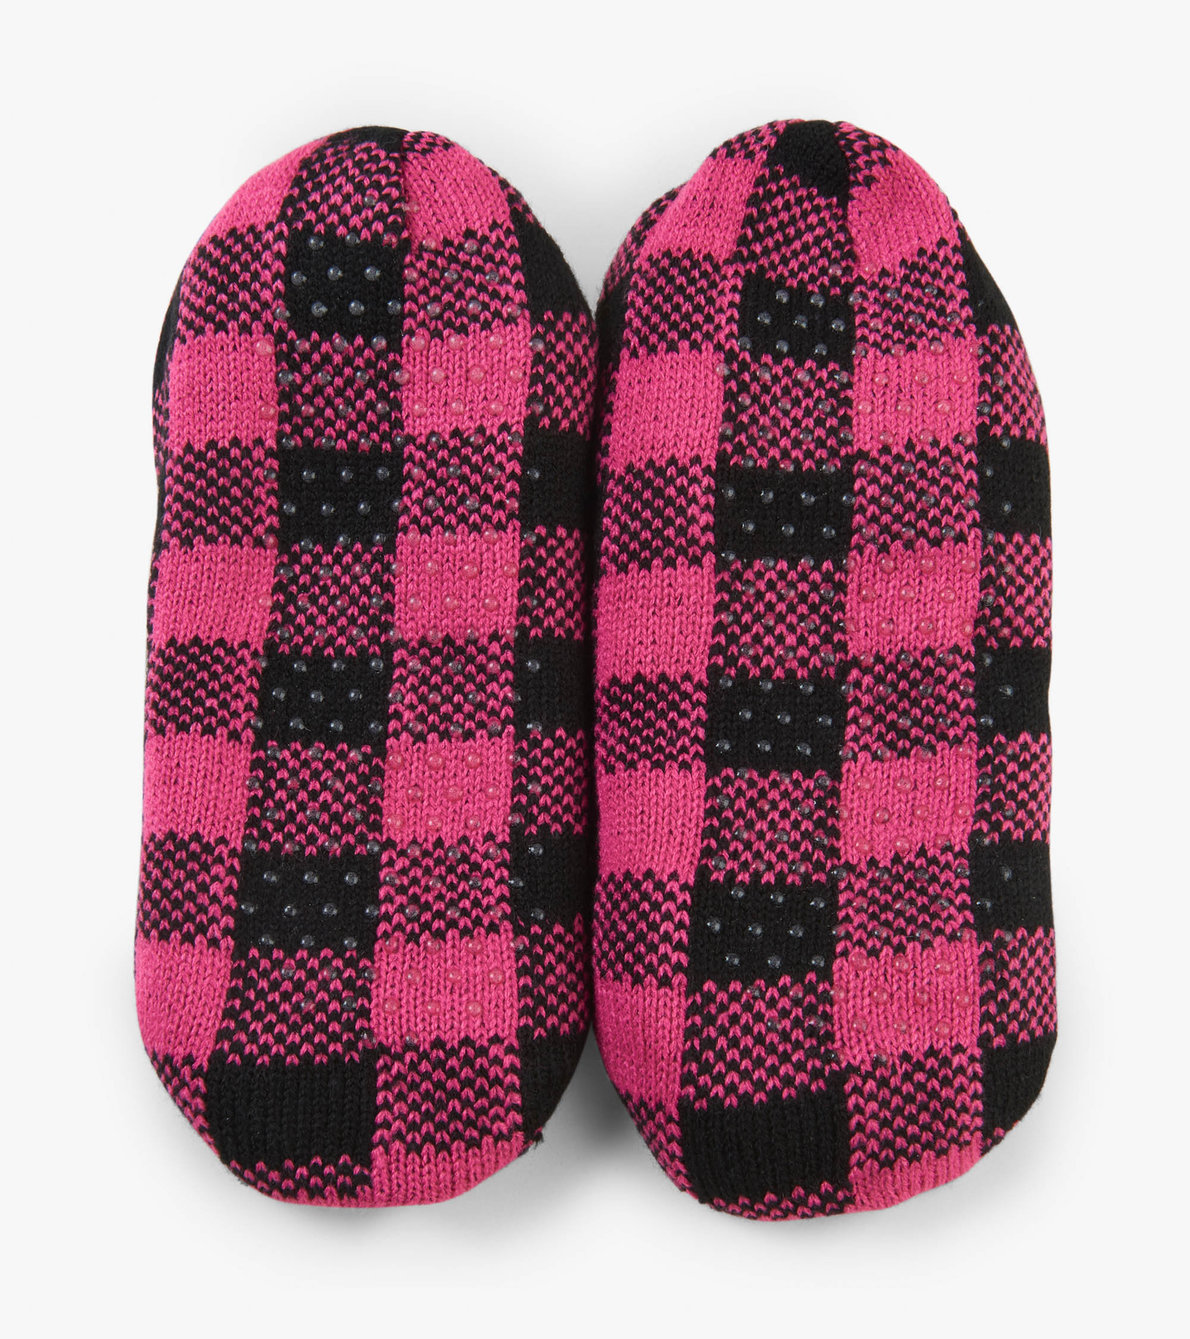 View larger image of Pink Plaid Women's Warm and Cozy Slippers